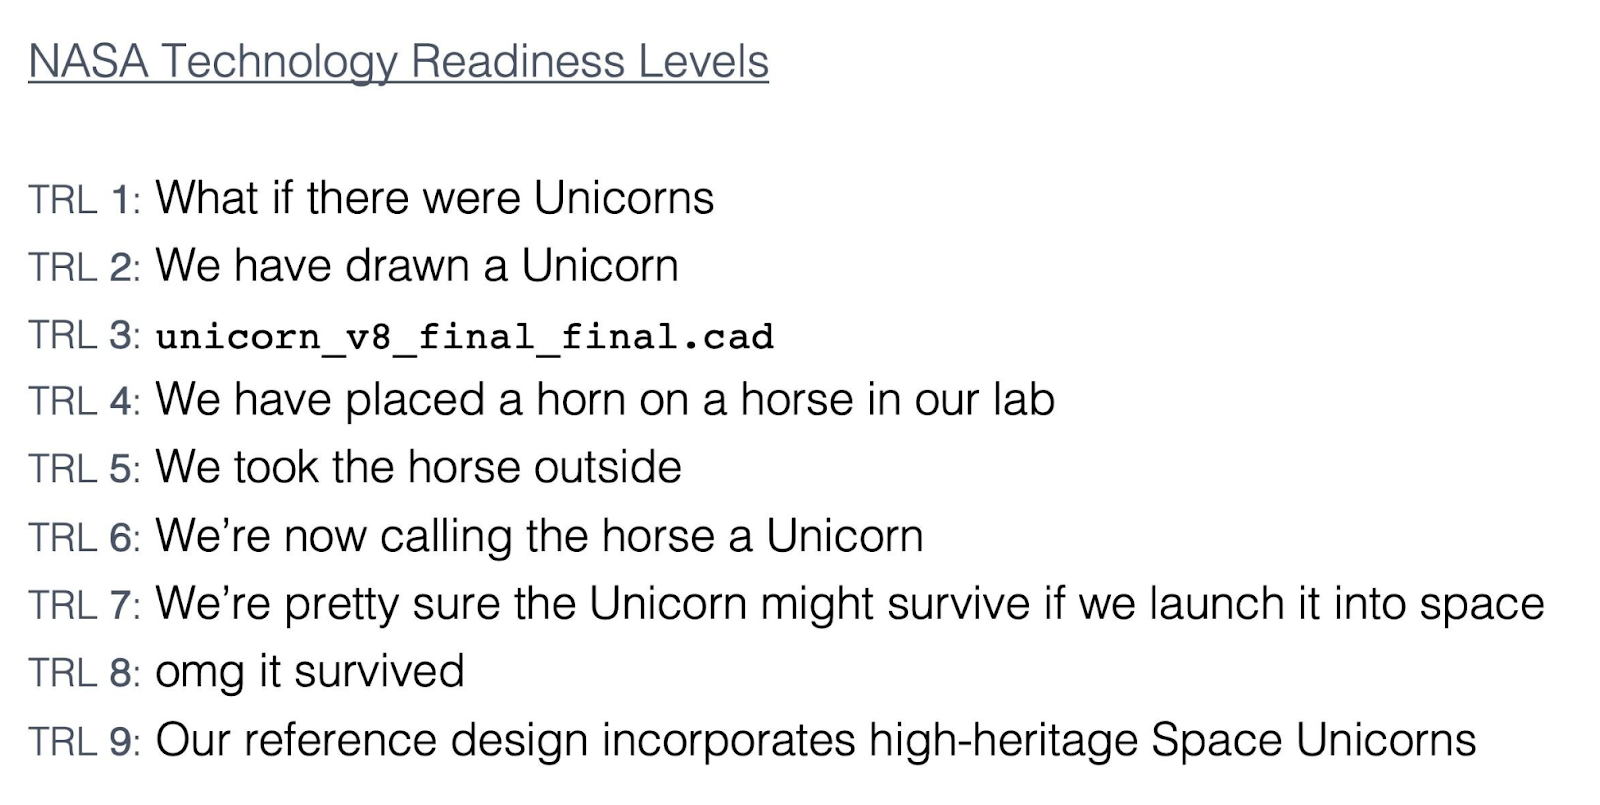 A unicorn-centered description of NASA's classification system for how developed a certain technology is. Image credits: Grant Tremblay https://www.granttremblay.com/blog/trls